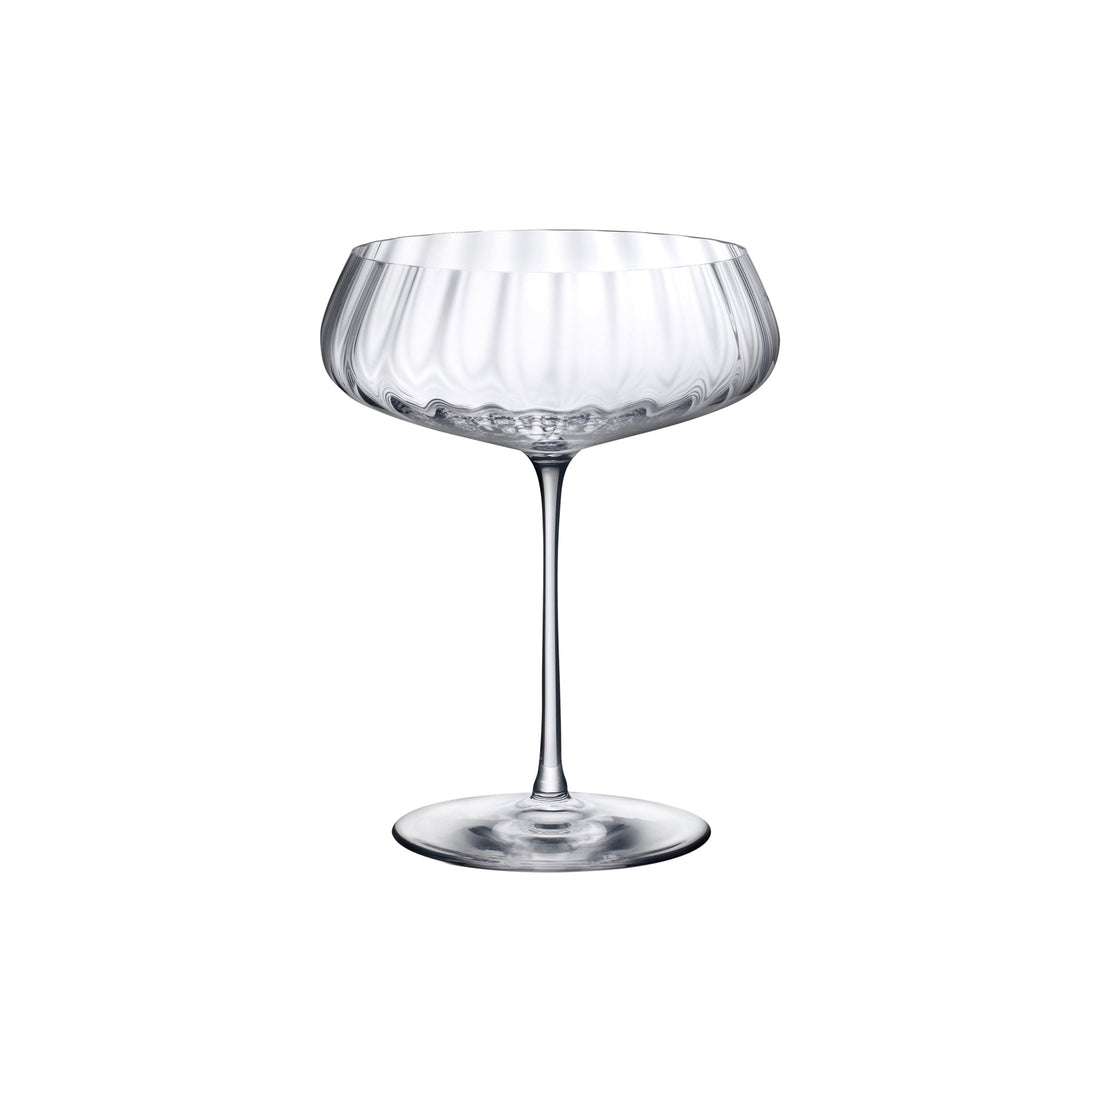 NUDE Round Up coupe glass, a lead-free crystal flute glass with a rounded rippled design in wide coupe shape, presented on white background